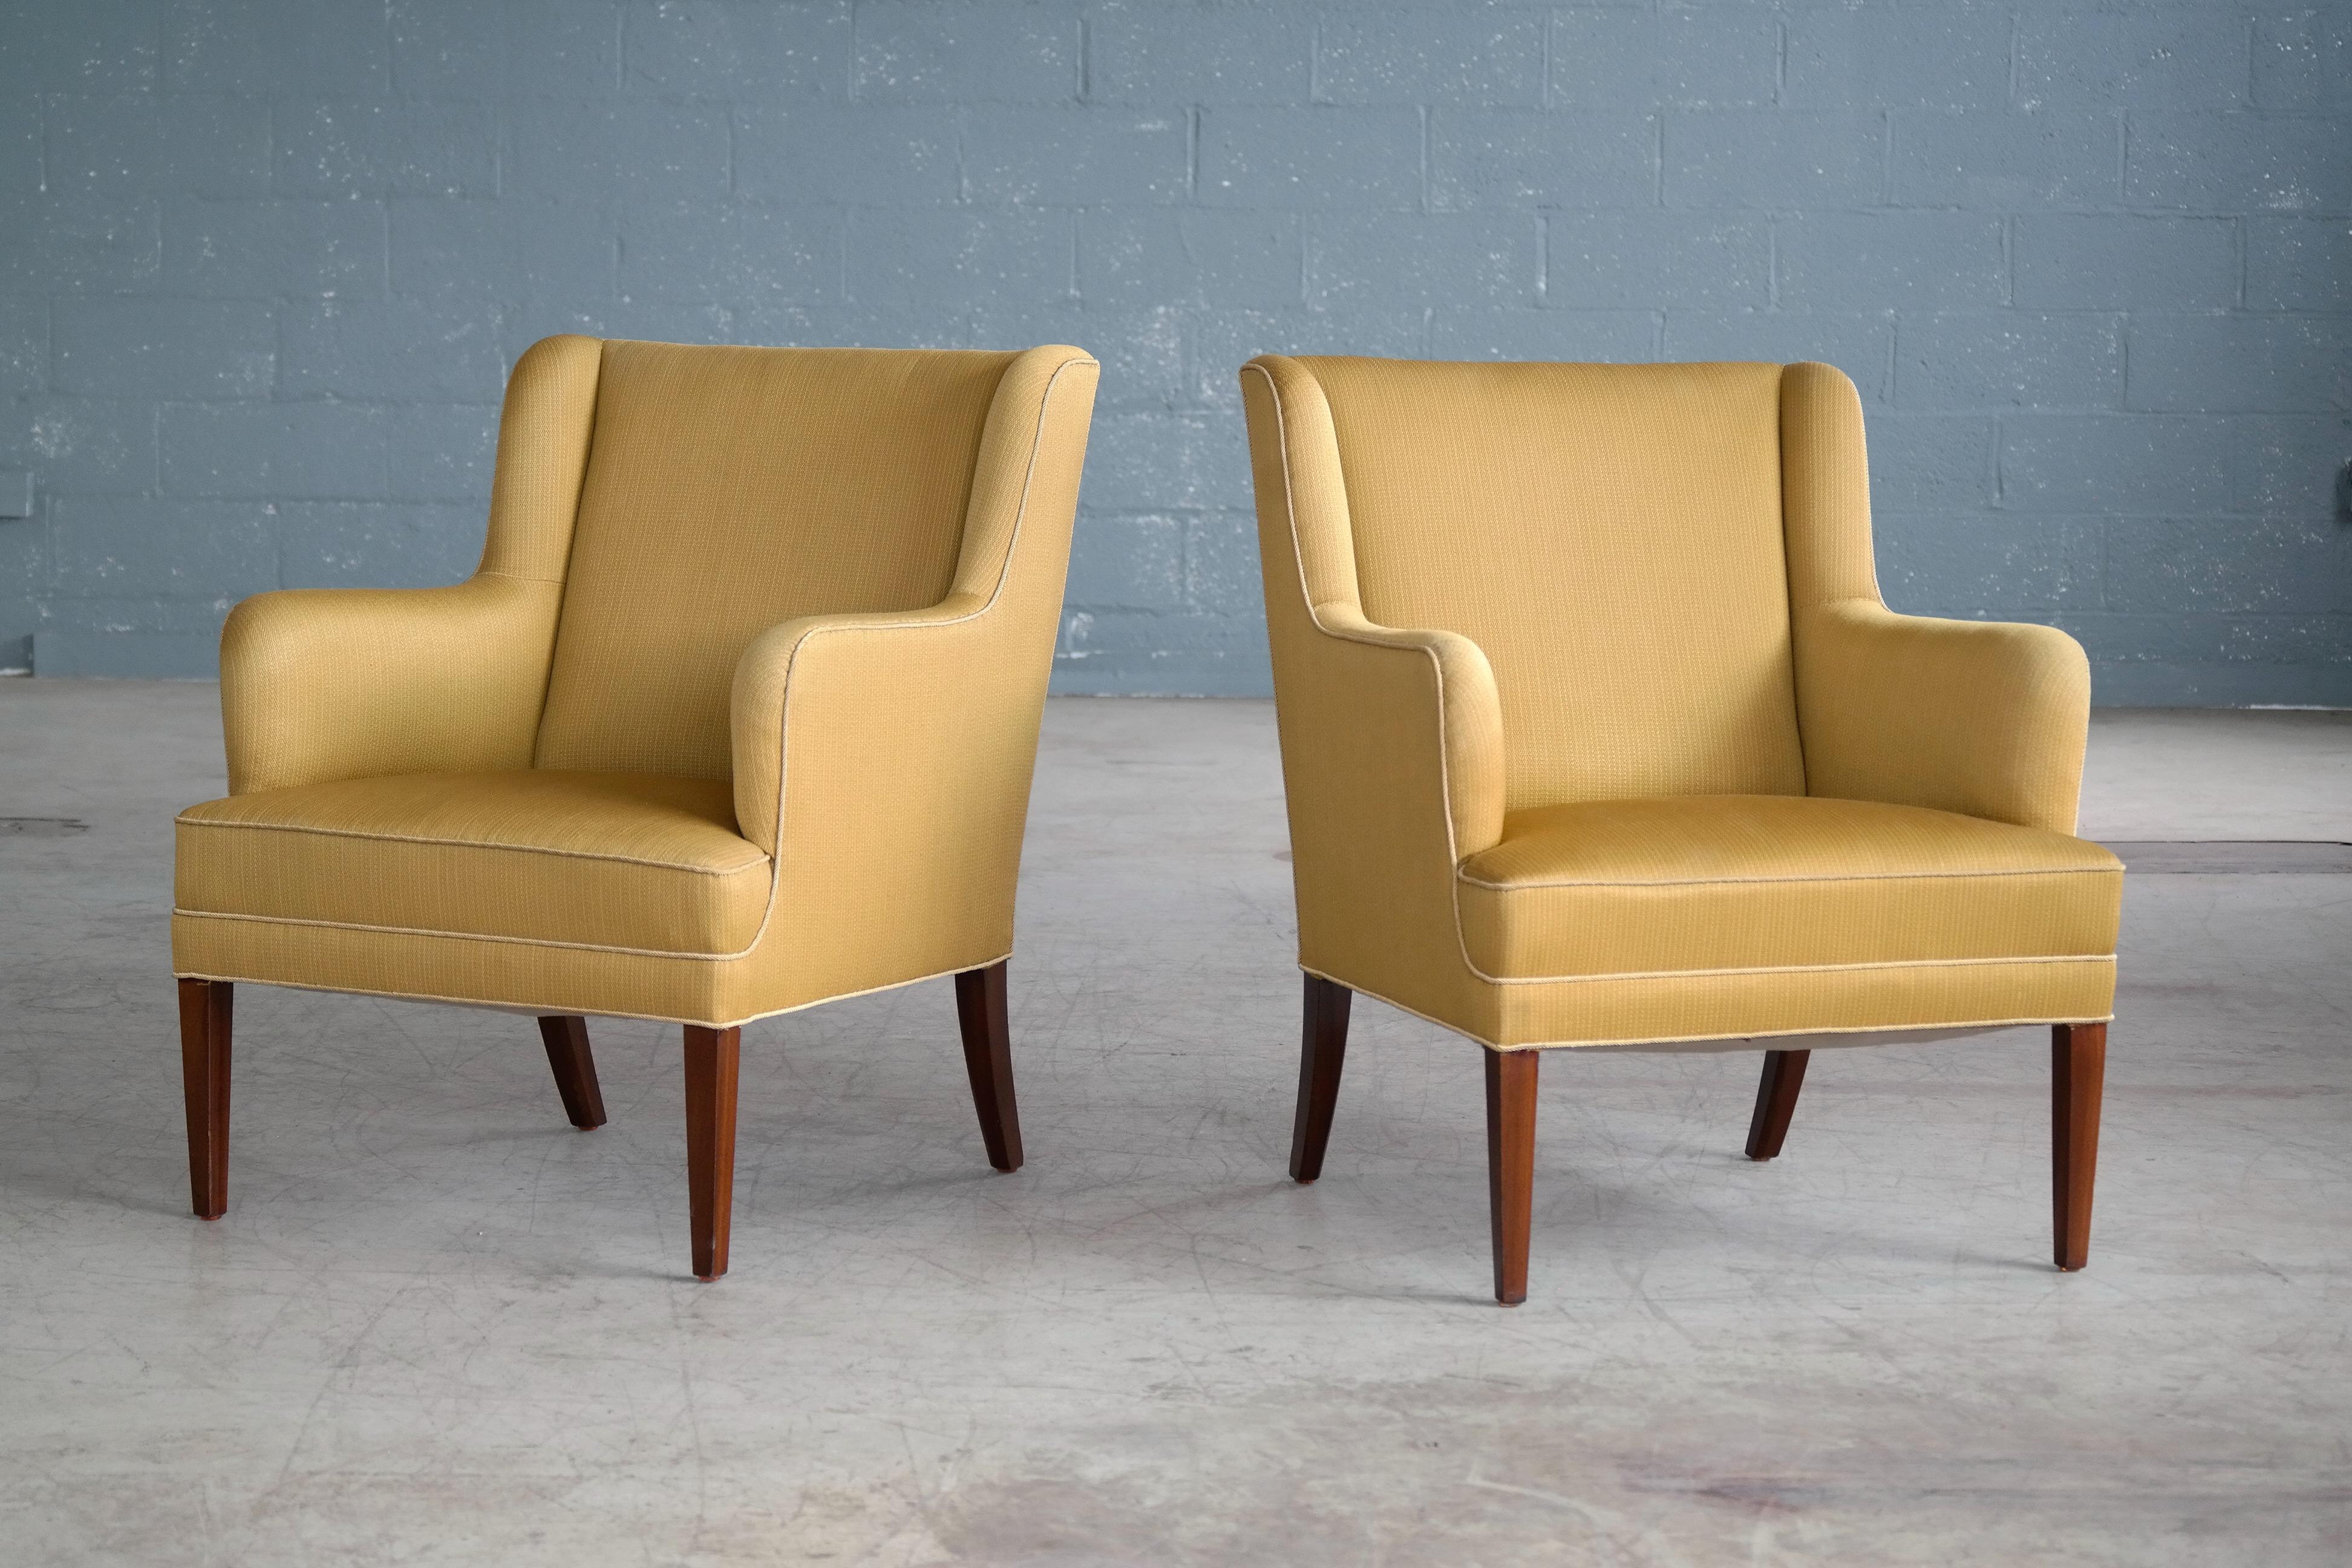 Classic Frits Henningsen lounge chairs made in Denmark circa 1950. Frits Henningsen's elegant and modern style go equally well in very modern environments or with something more traditional which is a main reason they are so sought after. These